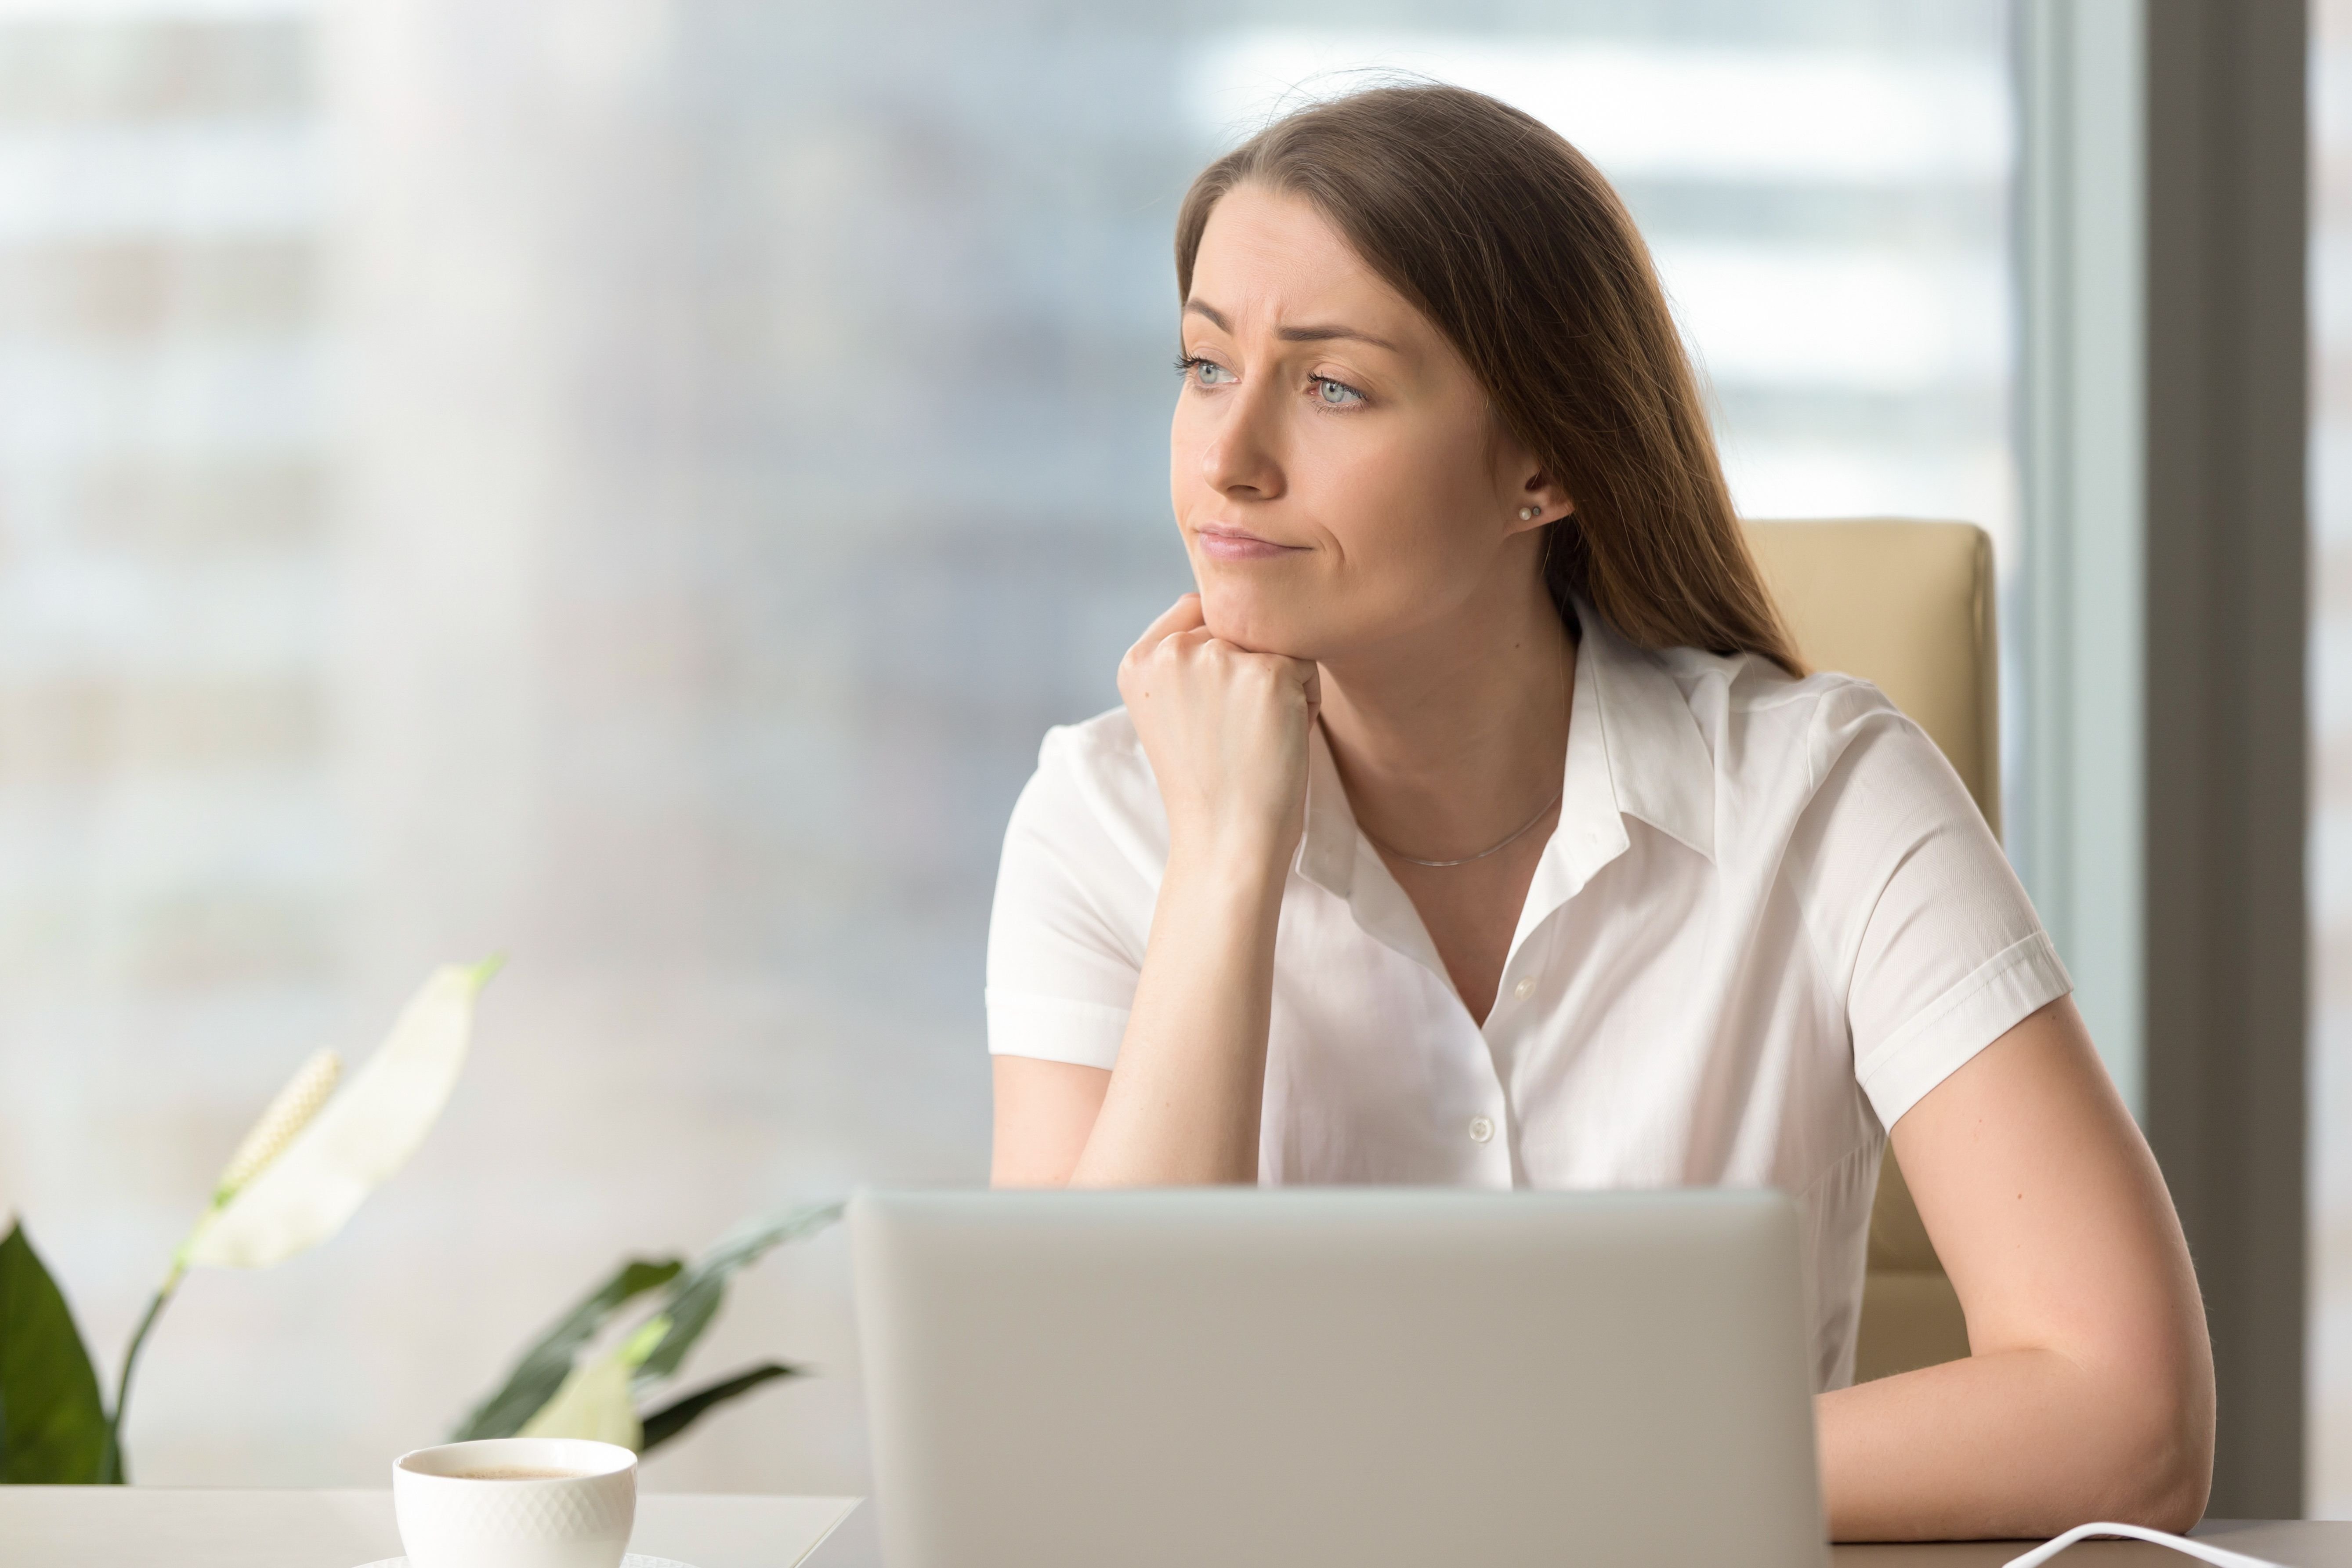 A woman in deep thought while using her laptop. | Source: Shutterstock